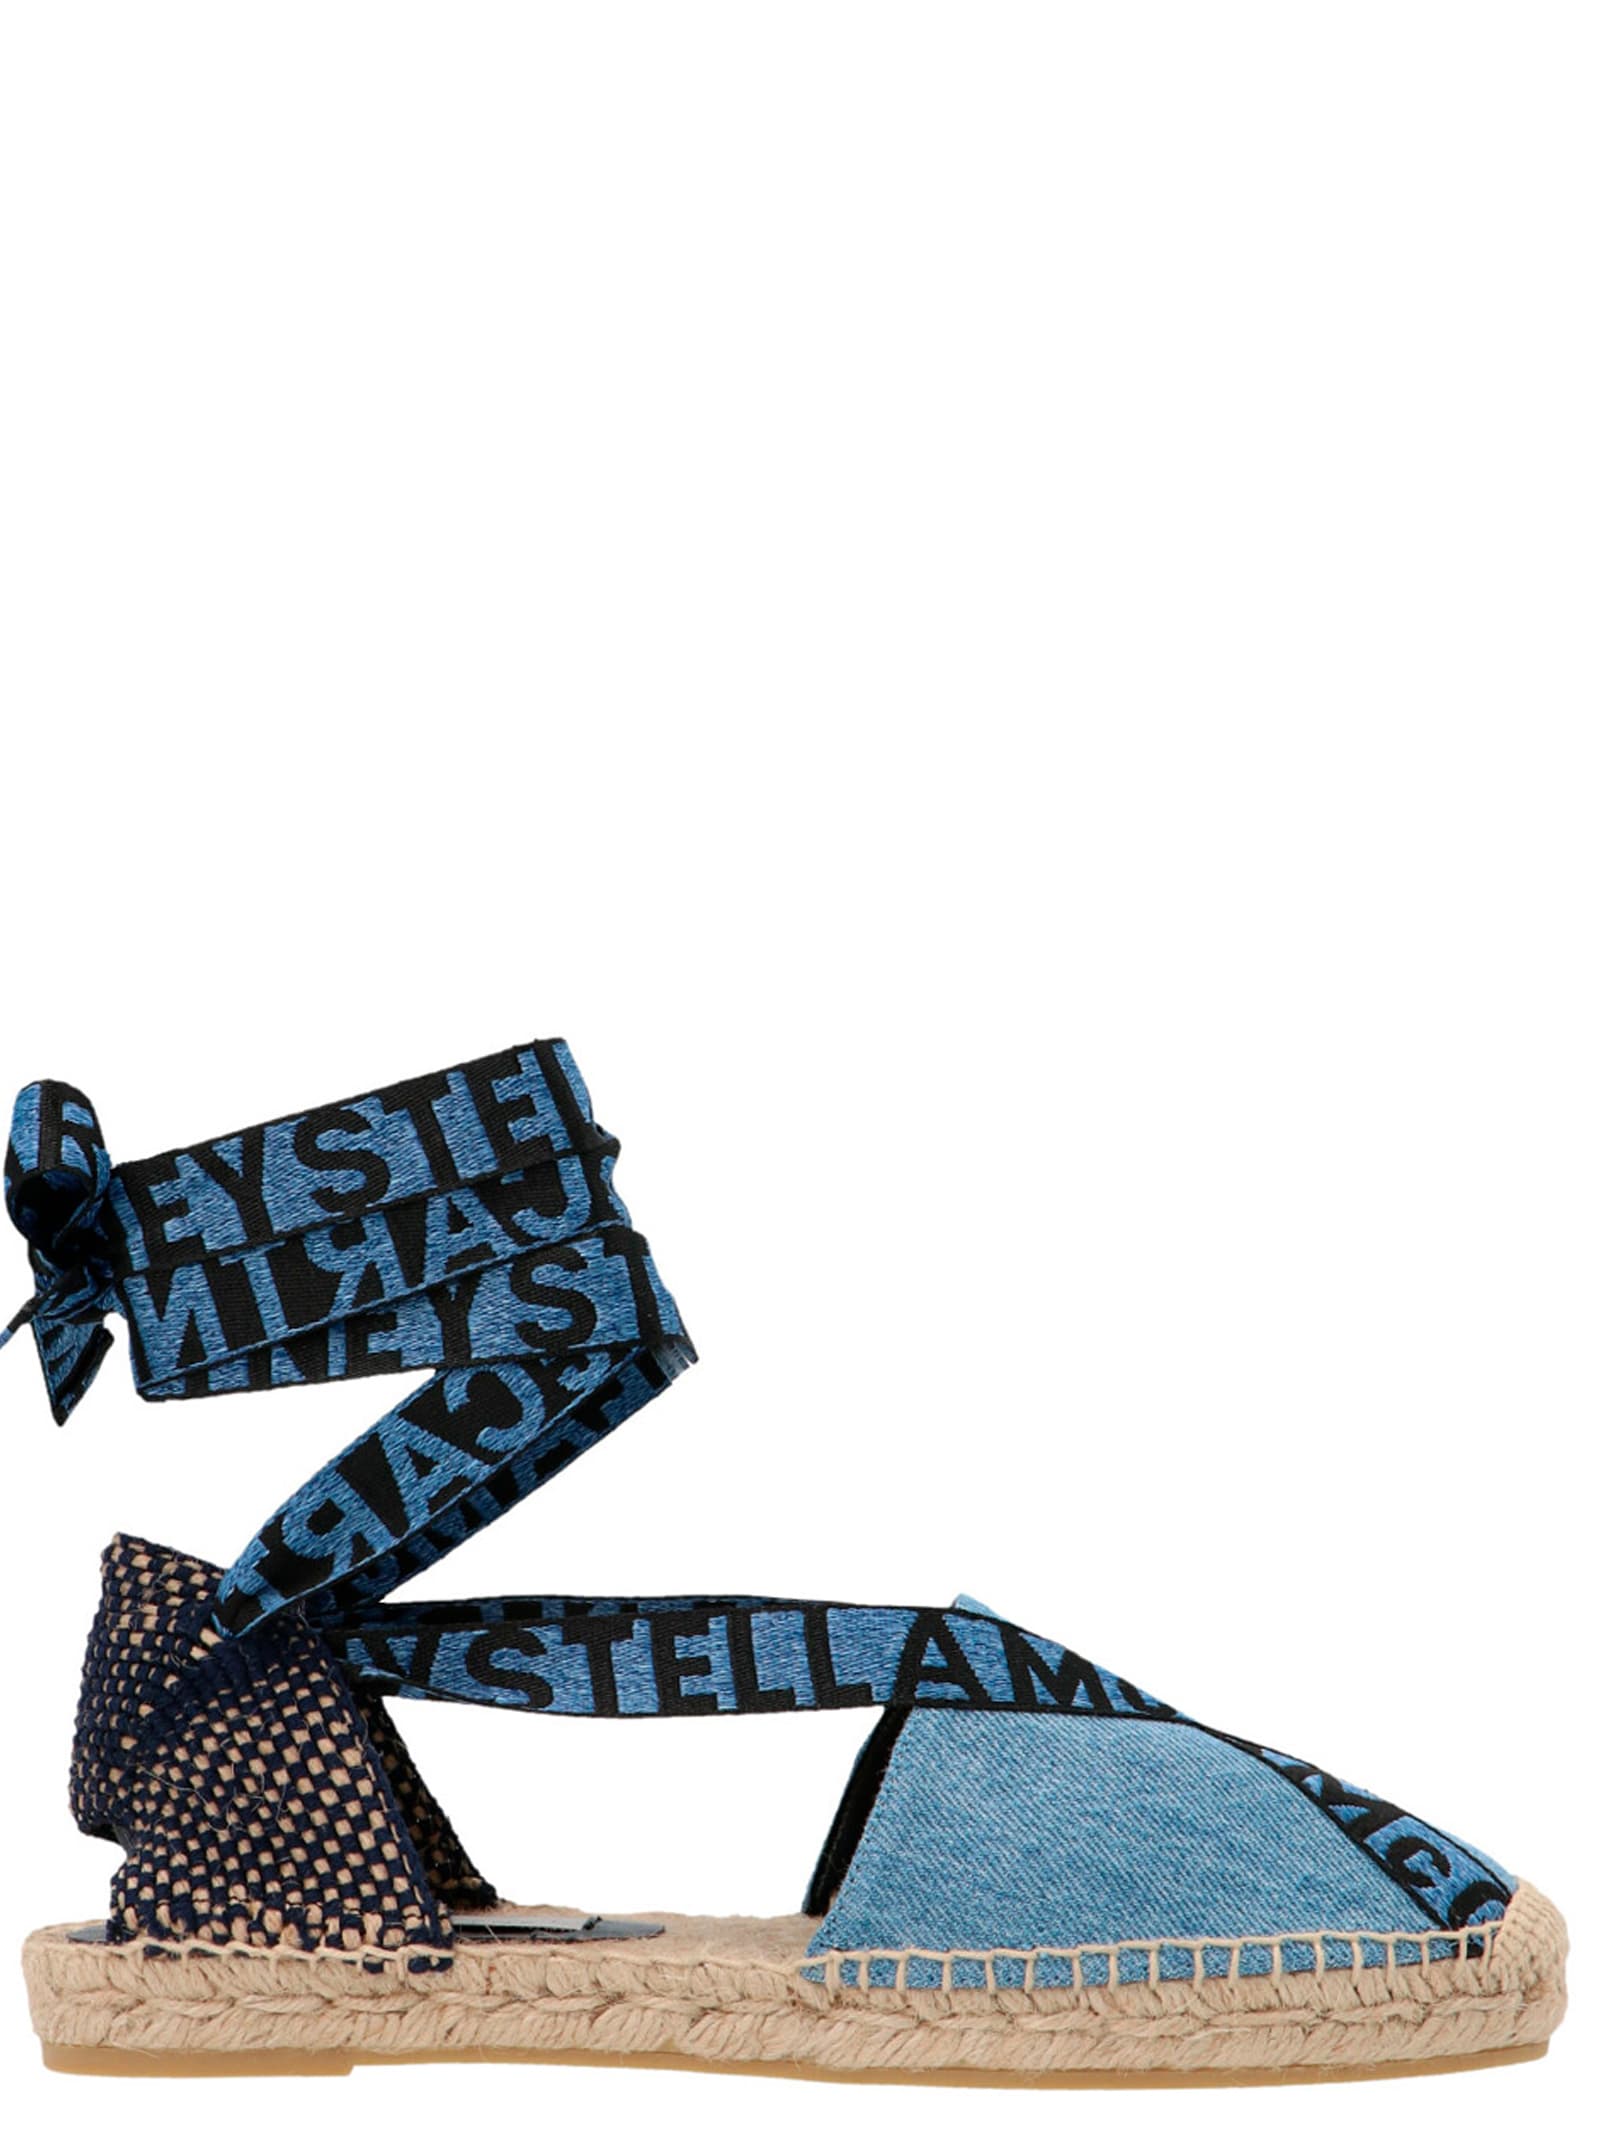 Buy Stella Mccartney gaia Shoes online, shop Stella McCartney shoes with free shipping